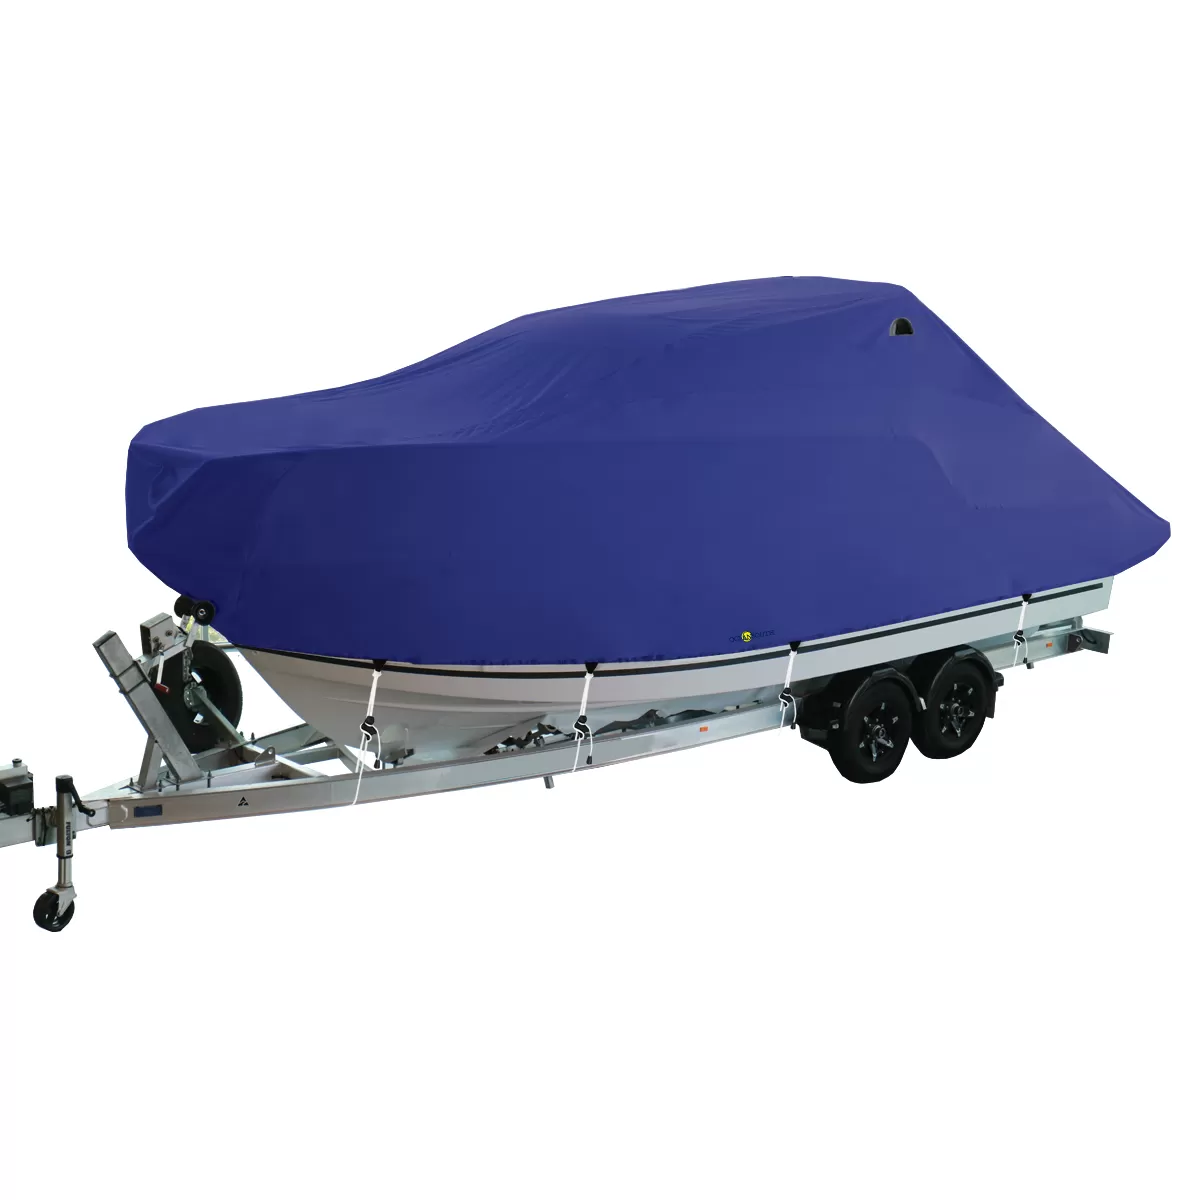 Universal Pilot / Cruiser Boat Covers | Oceansouth